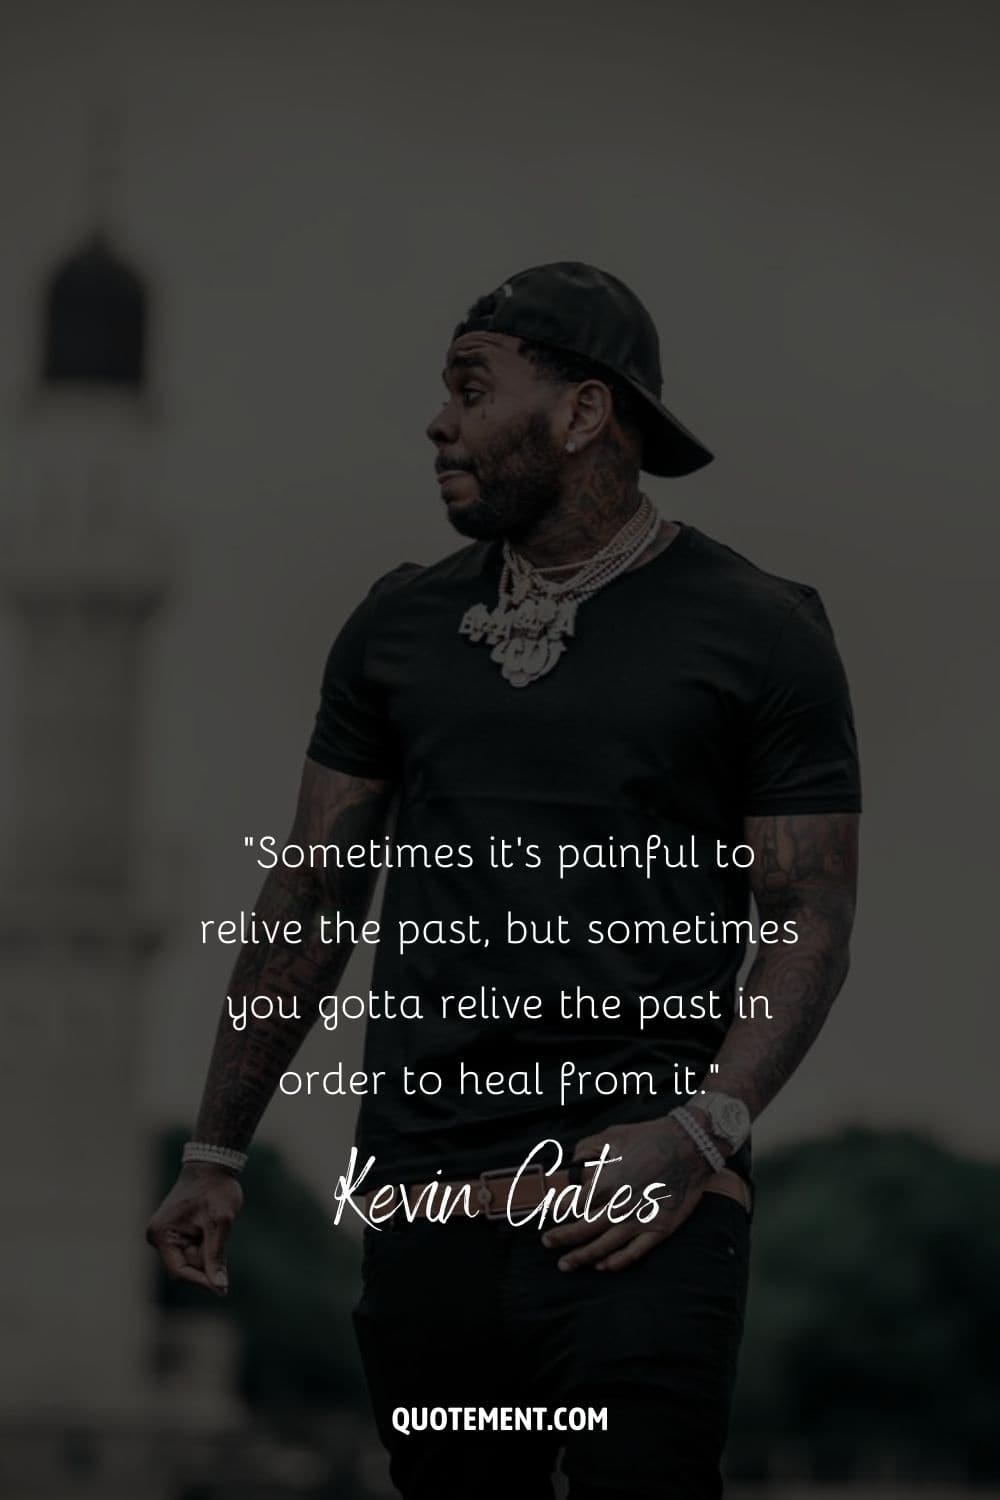 “Sometimes it’s painful to relive the past, but sometimes you gotta relive the past in order to heal from it.” – Kevin Gates